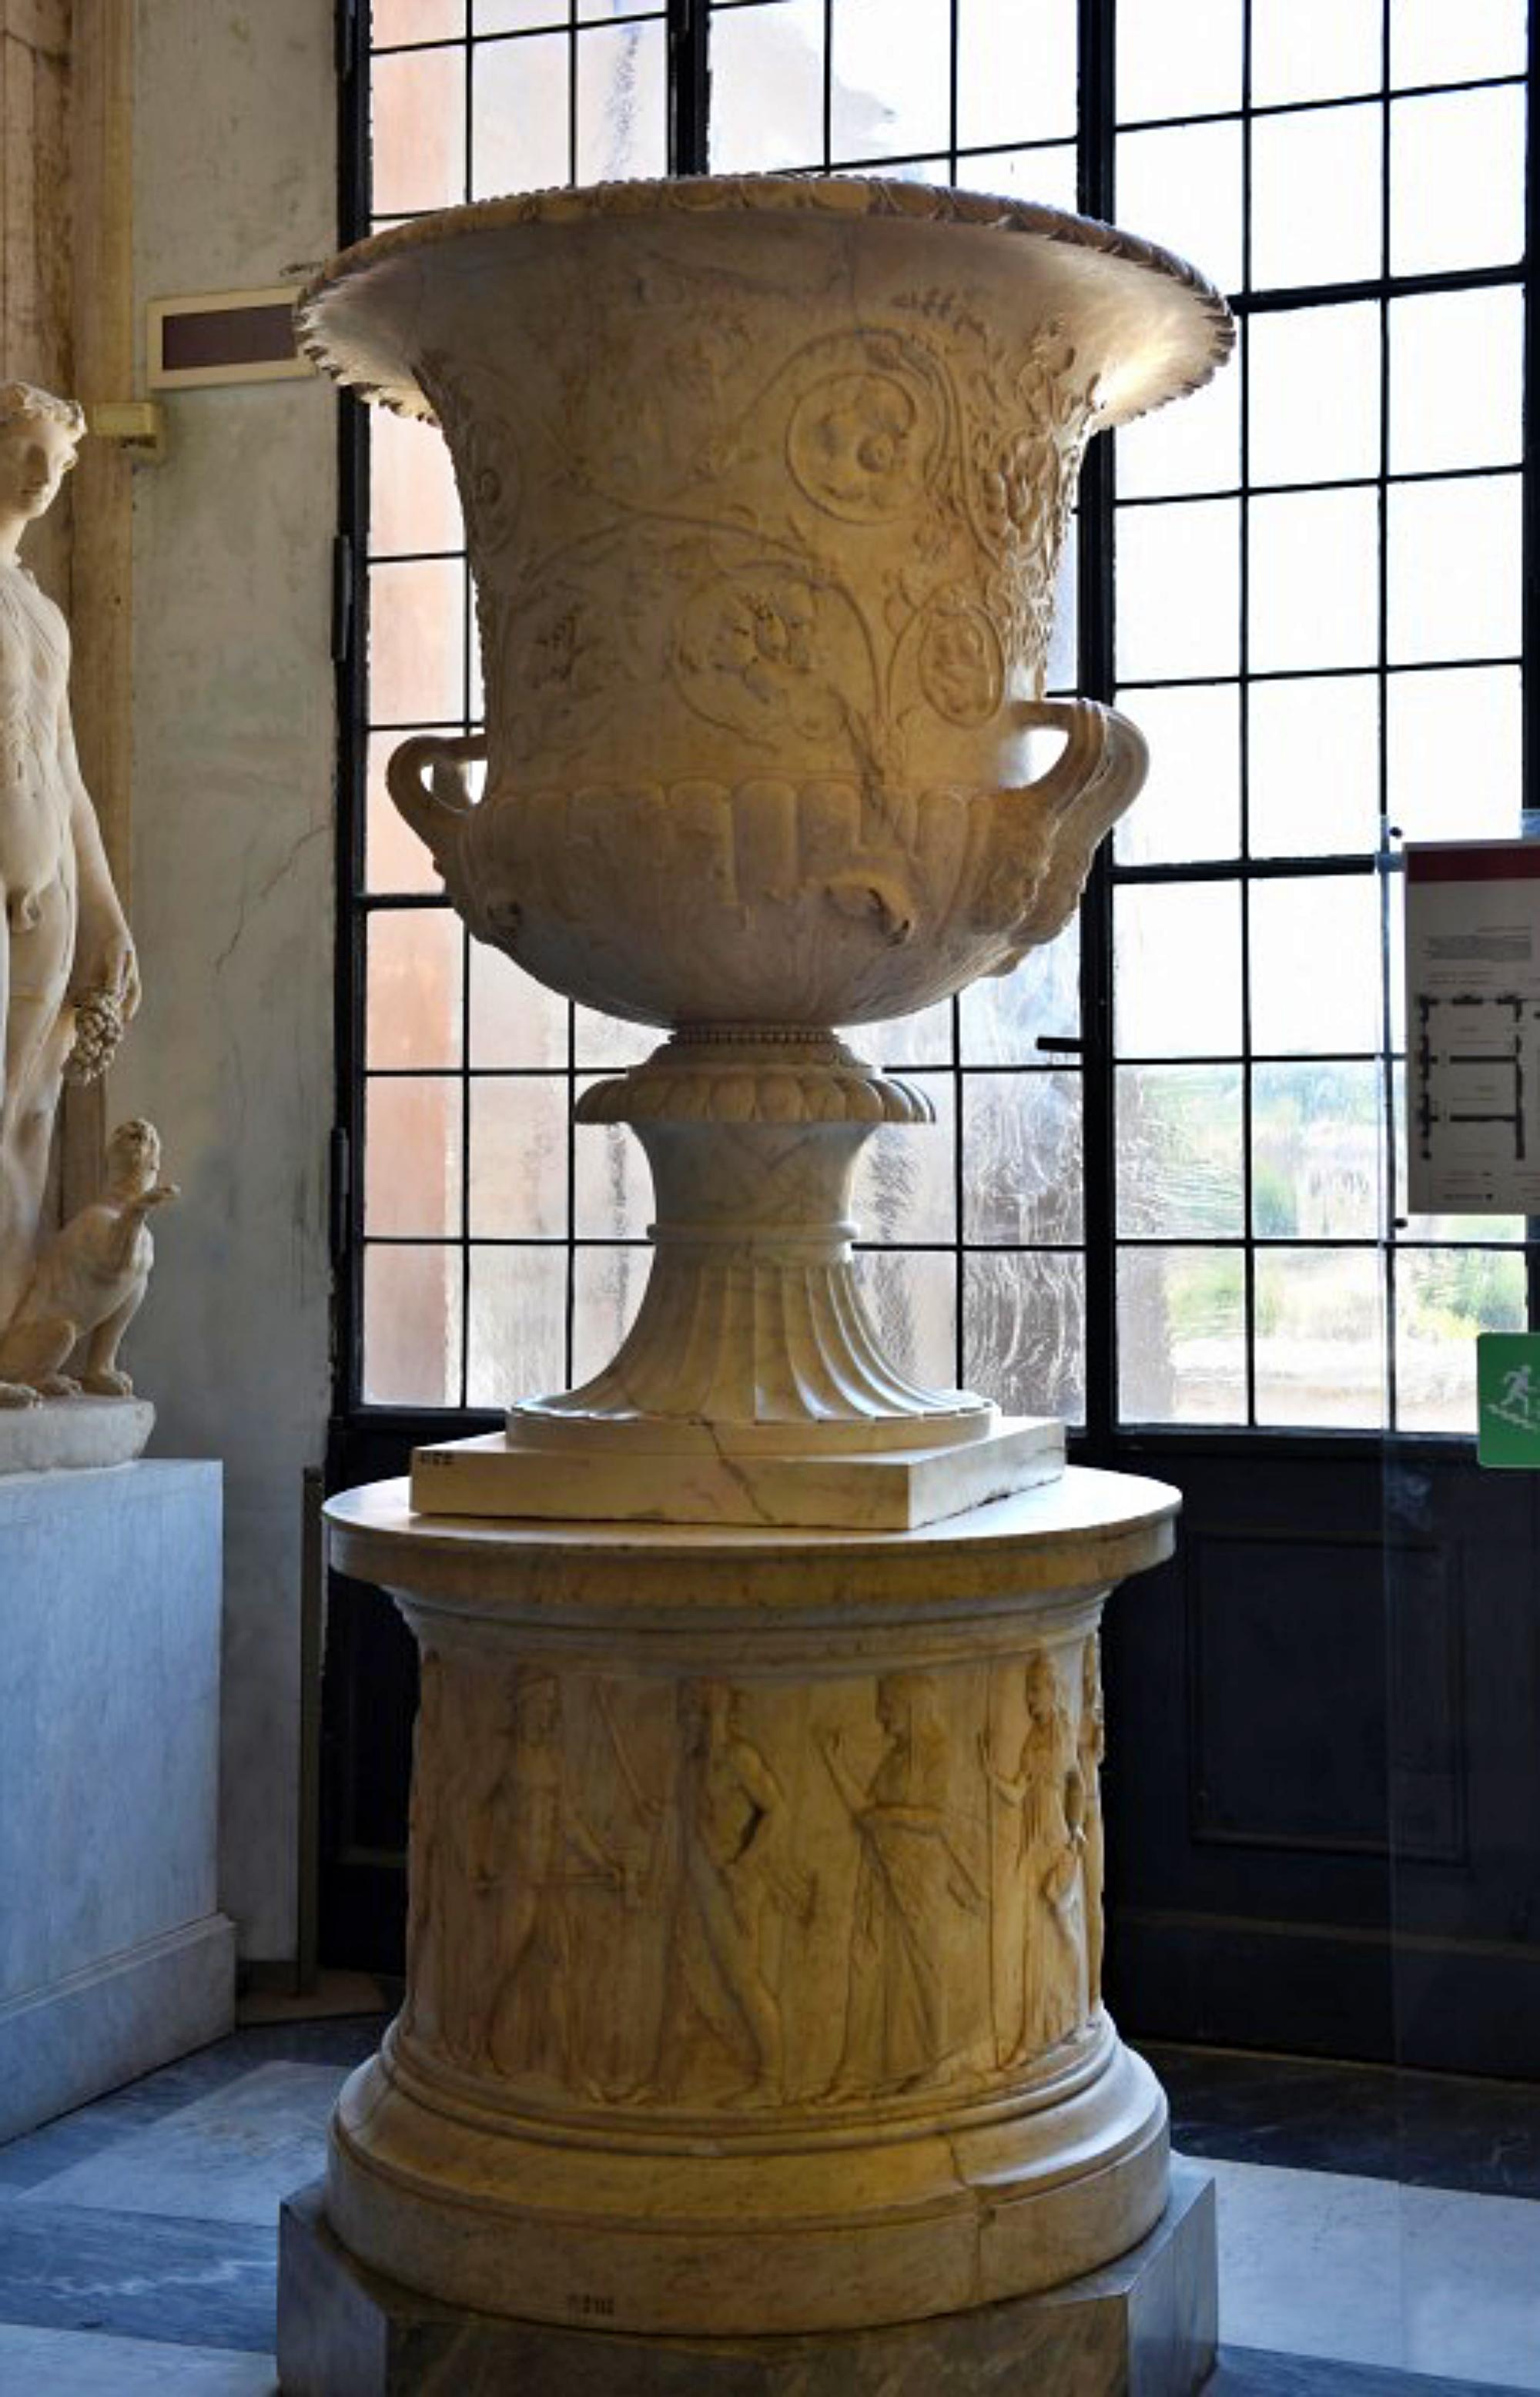 CAPITOLINE VASE OF PYRANESI BELL-SHAPED CRATER DECORATED WITH FLORAL SWIRLS AND ACANTUS LEAVES early 20th Century

Roman vase from the Classical era (1st century AD).
Bell-shaped krater decorated with floral scrolls and acanthus leaves.
This